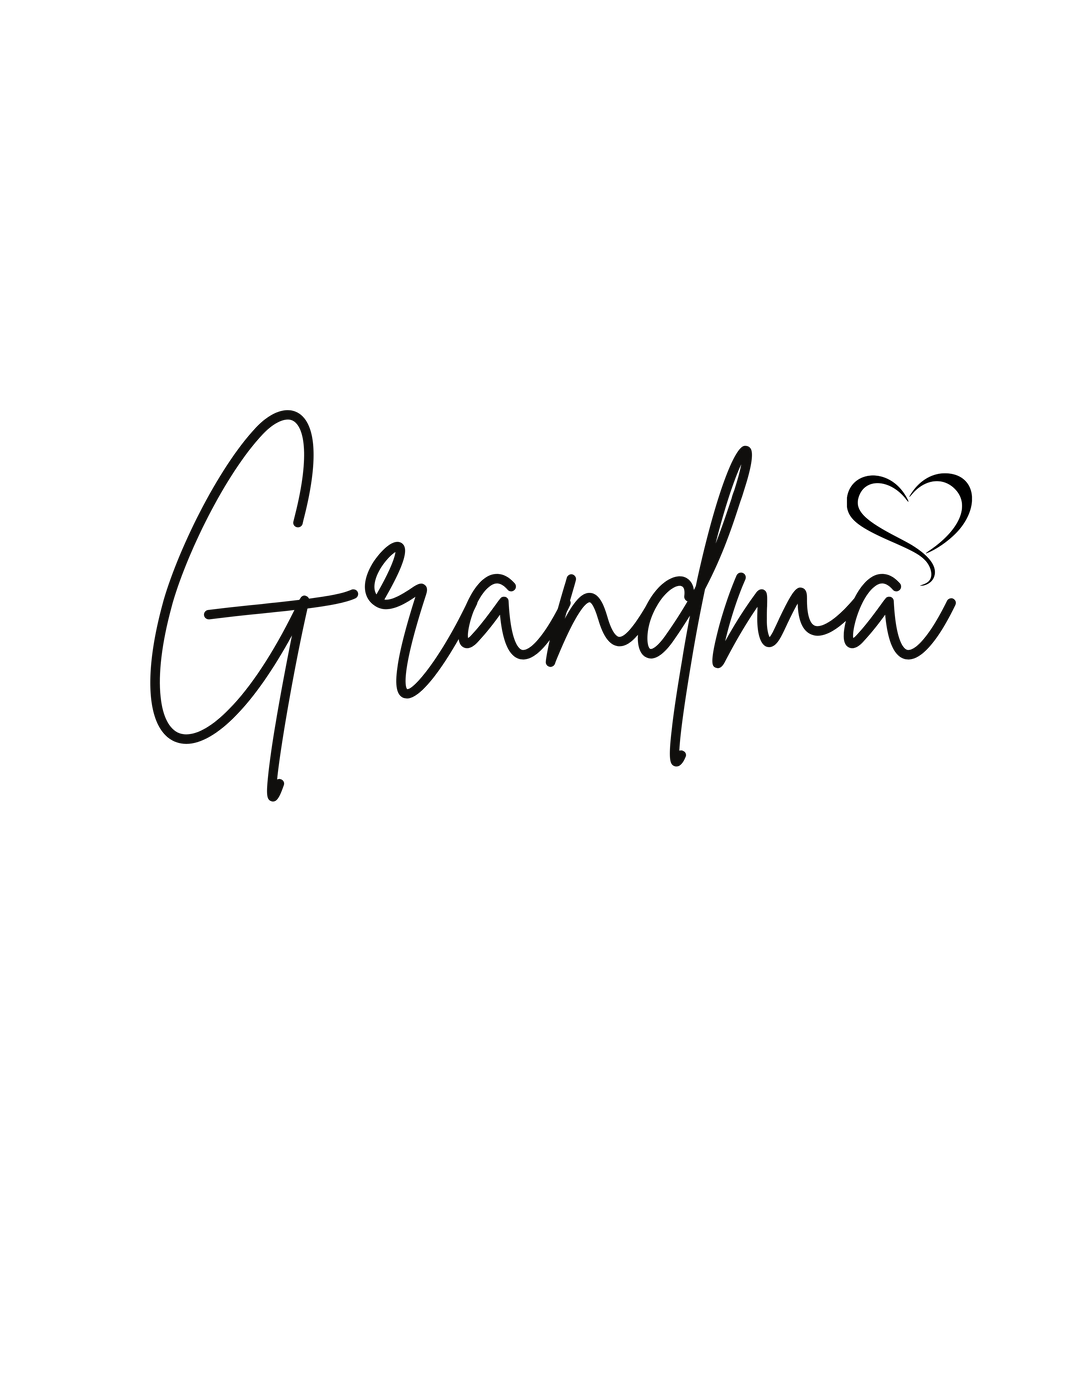 A classic Grandma Love Tee in black, featuring elegant calligraphy on a black background. Unisex, 100% cotton, with no side seams for comfort. Medium weight, classic fit. Sizes S to 5XL.